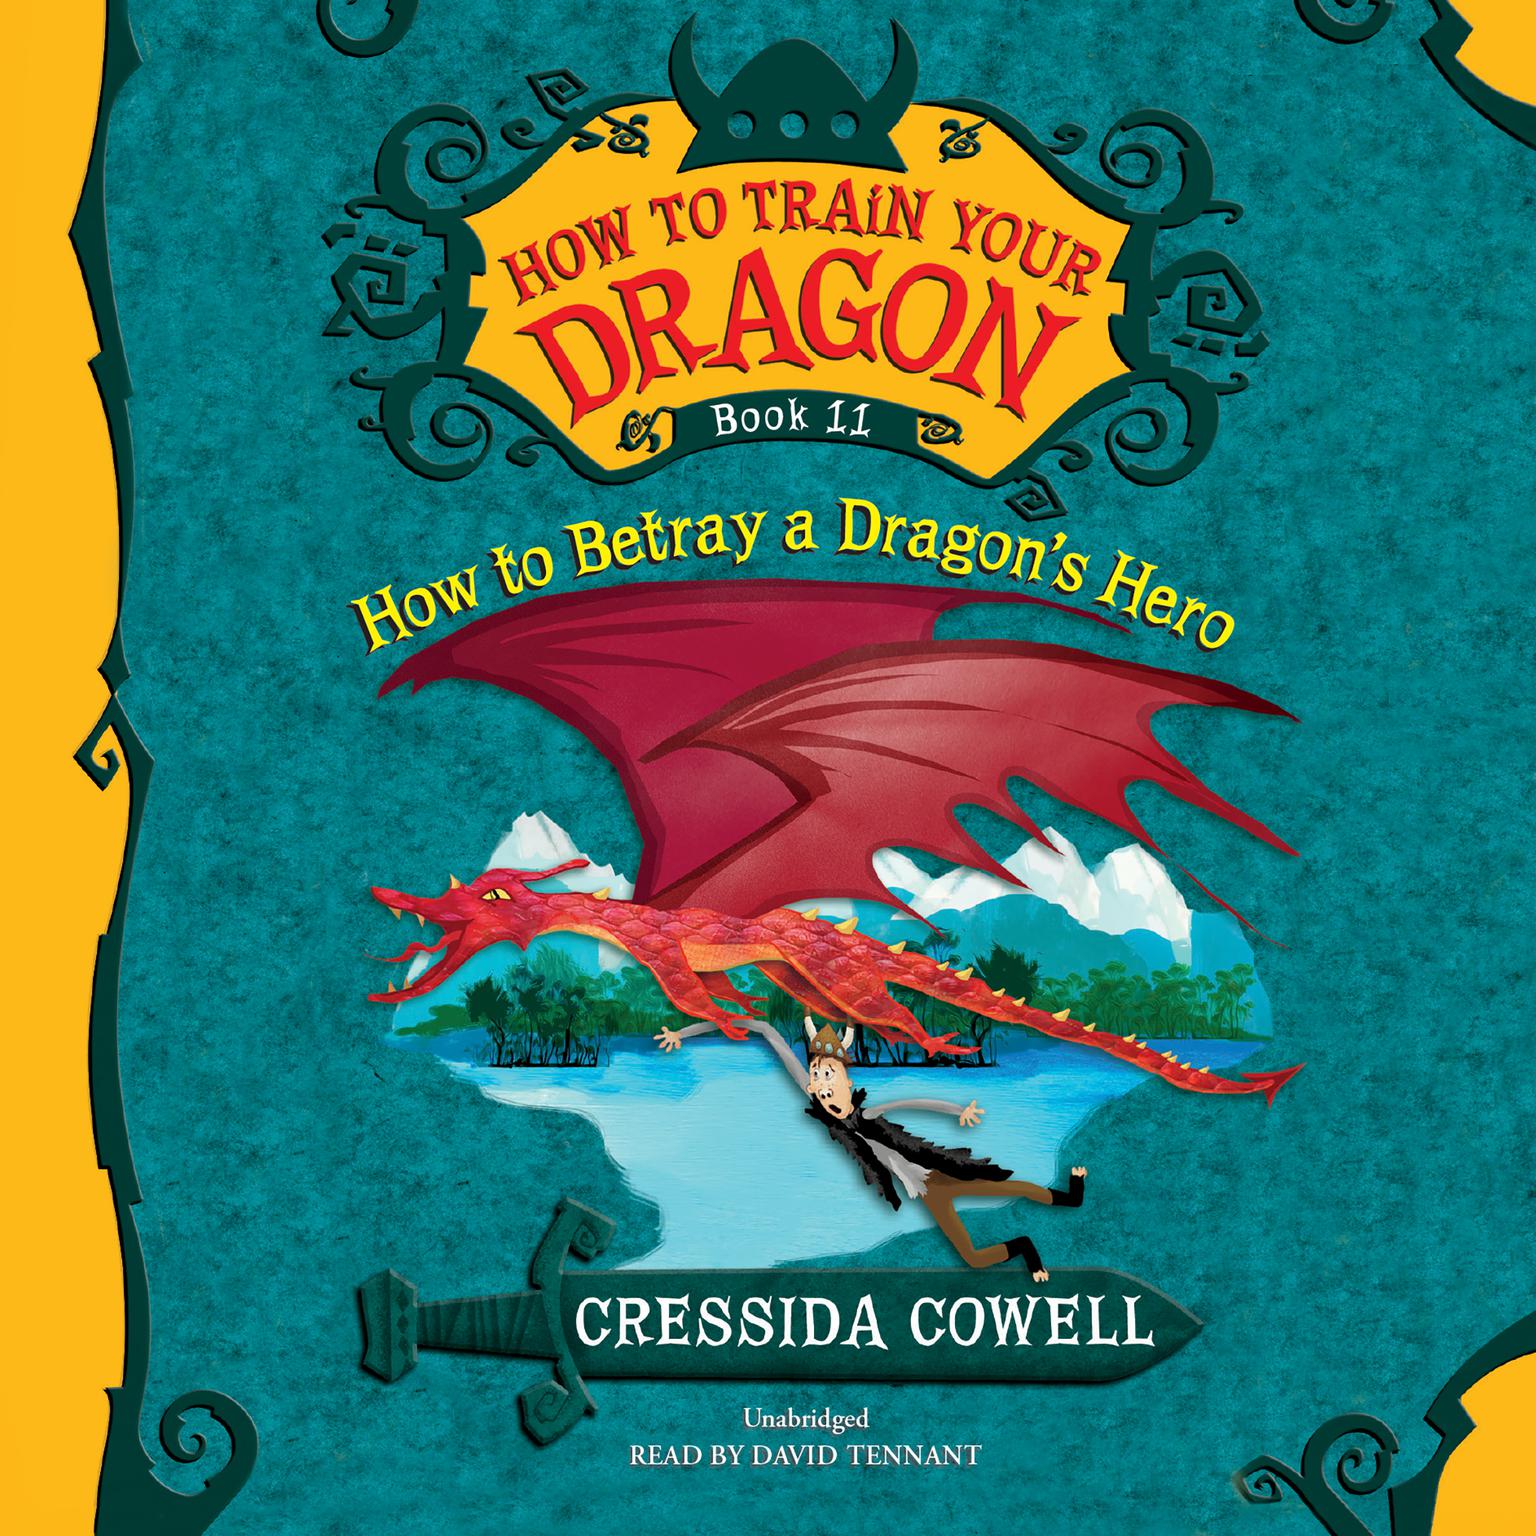 HOW TO BETRAY A DRAGONS HERO Audiobook, by Cressida Cowell